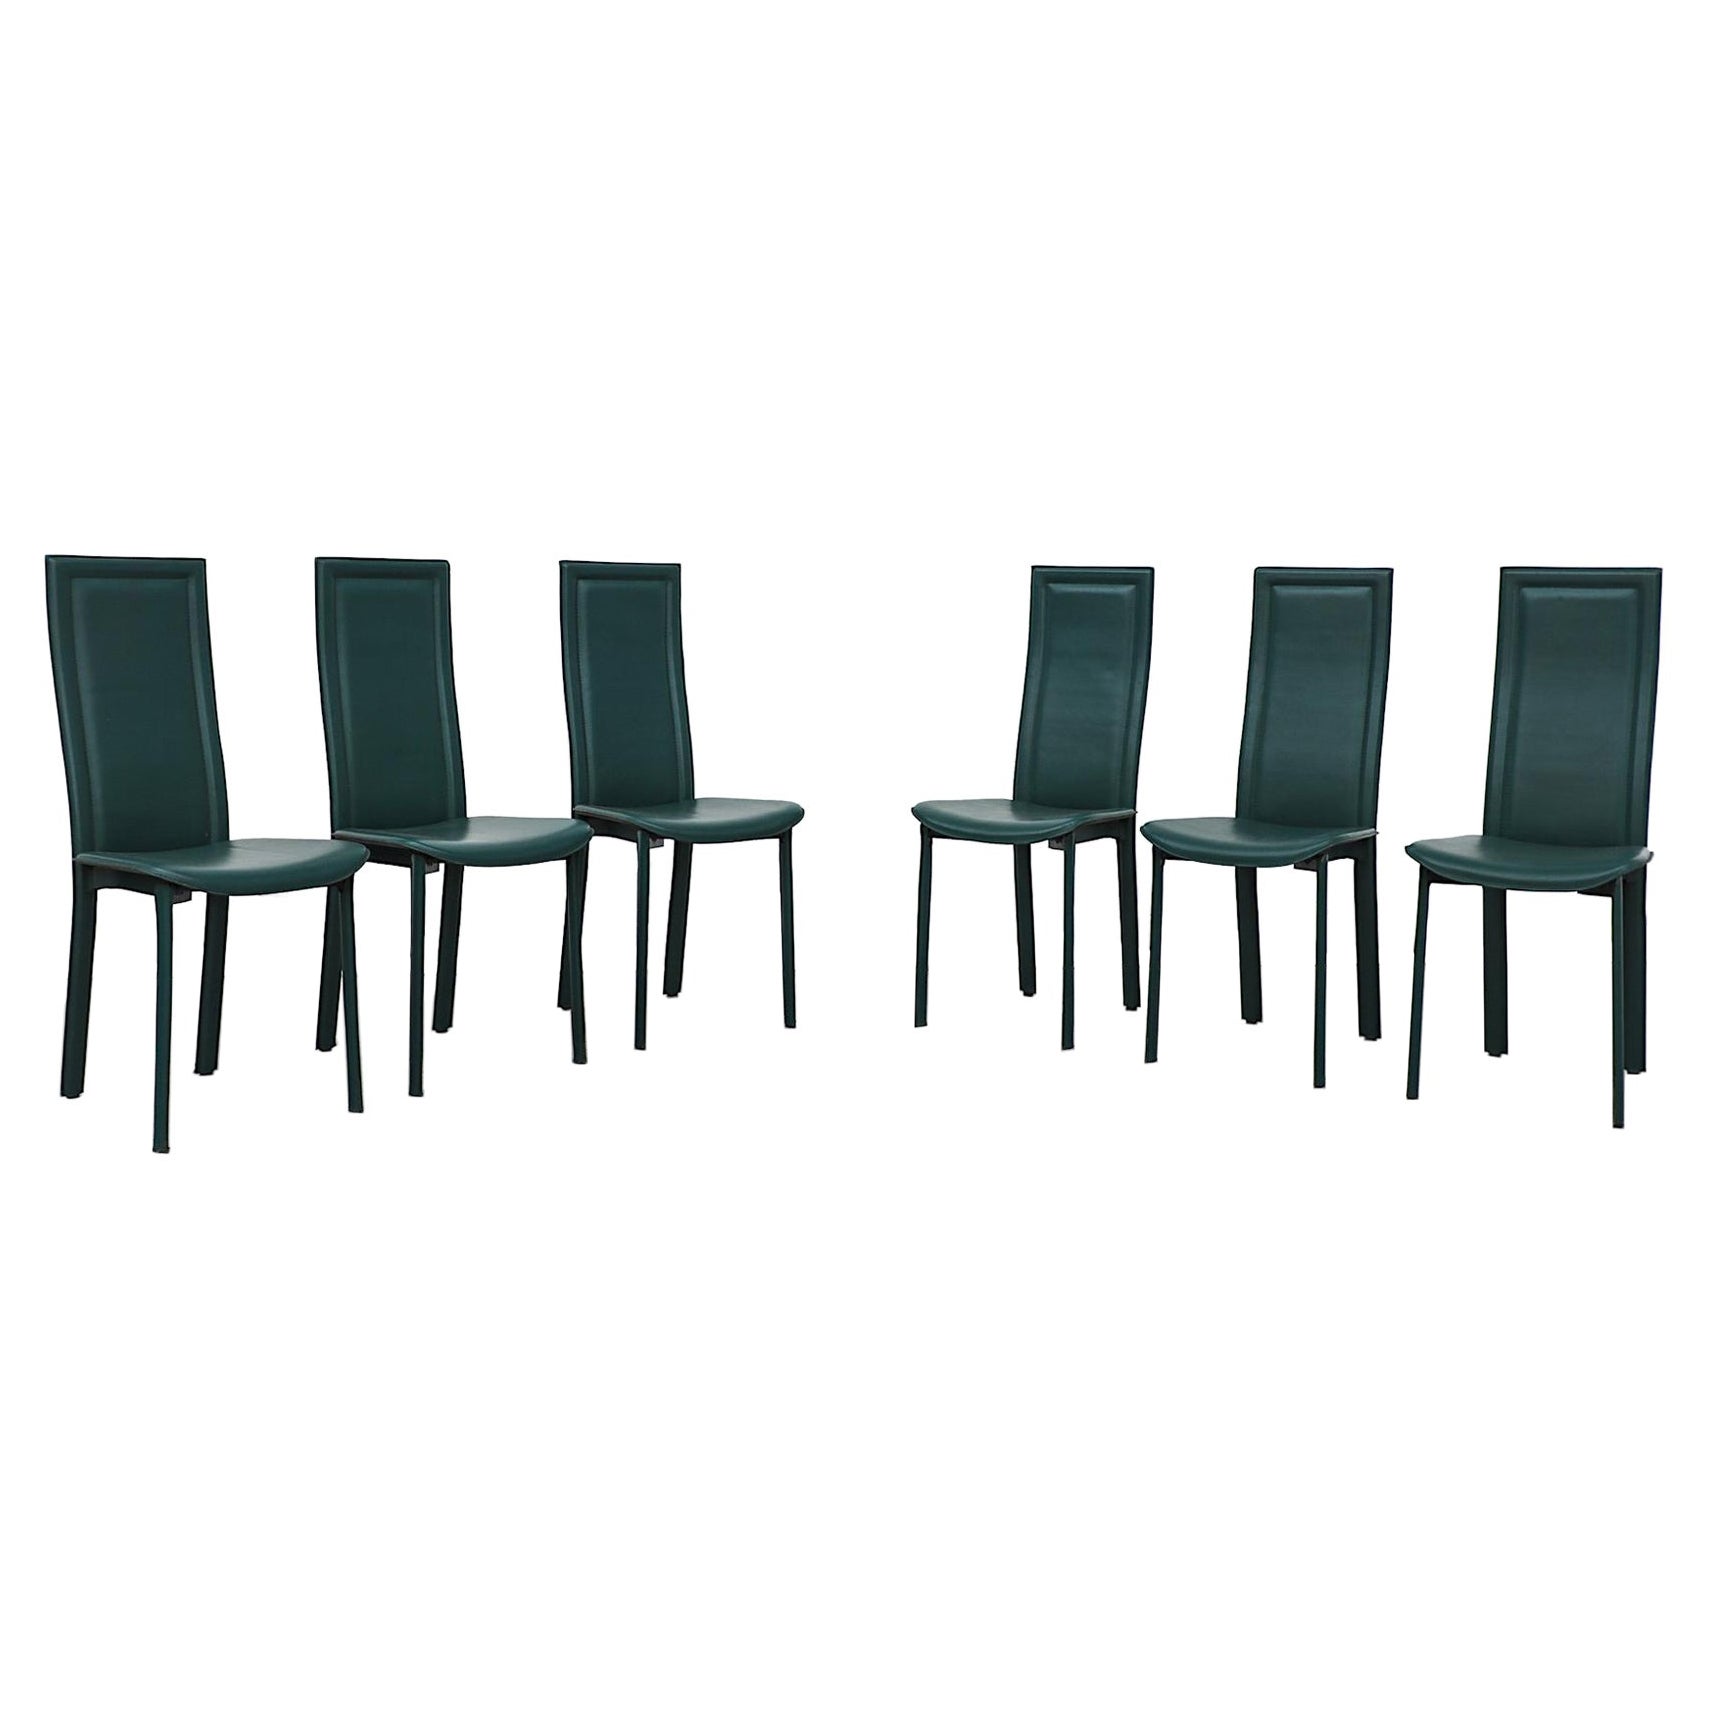 Set of 6 Handsome Green Leather Cattelan Italia High Back Dining Chairs For Sale